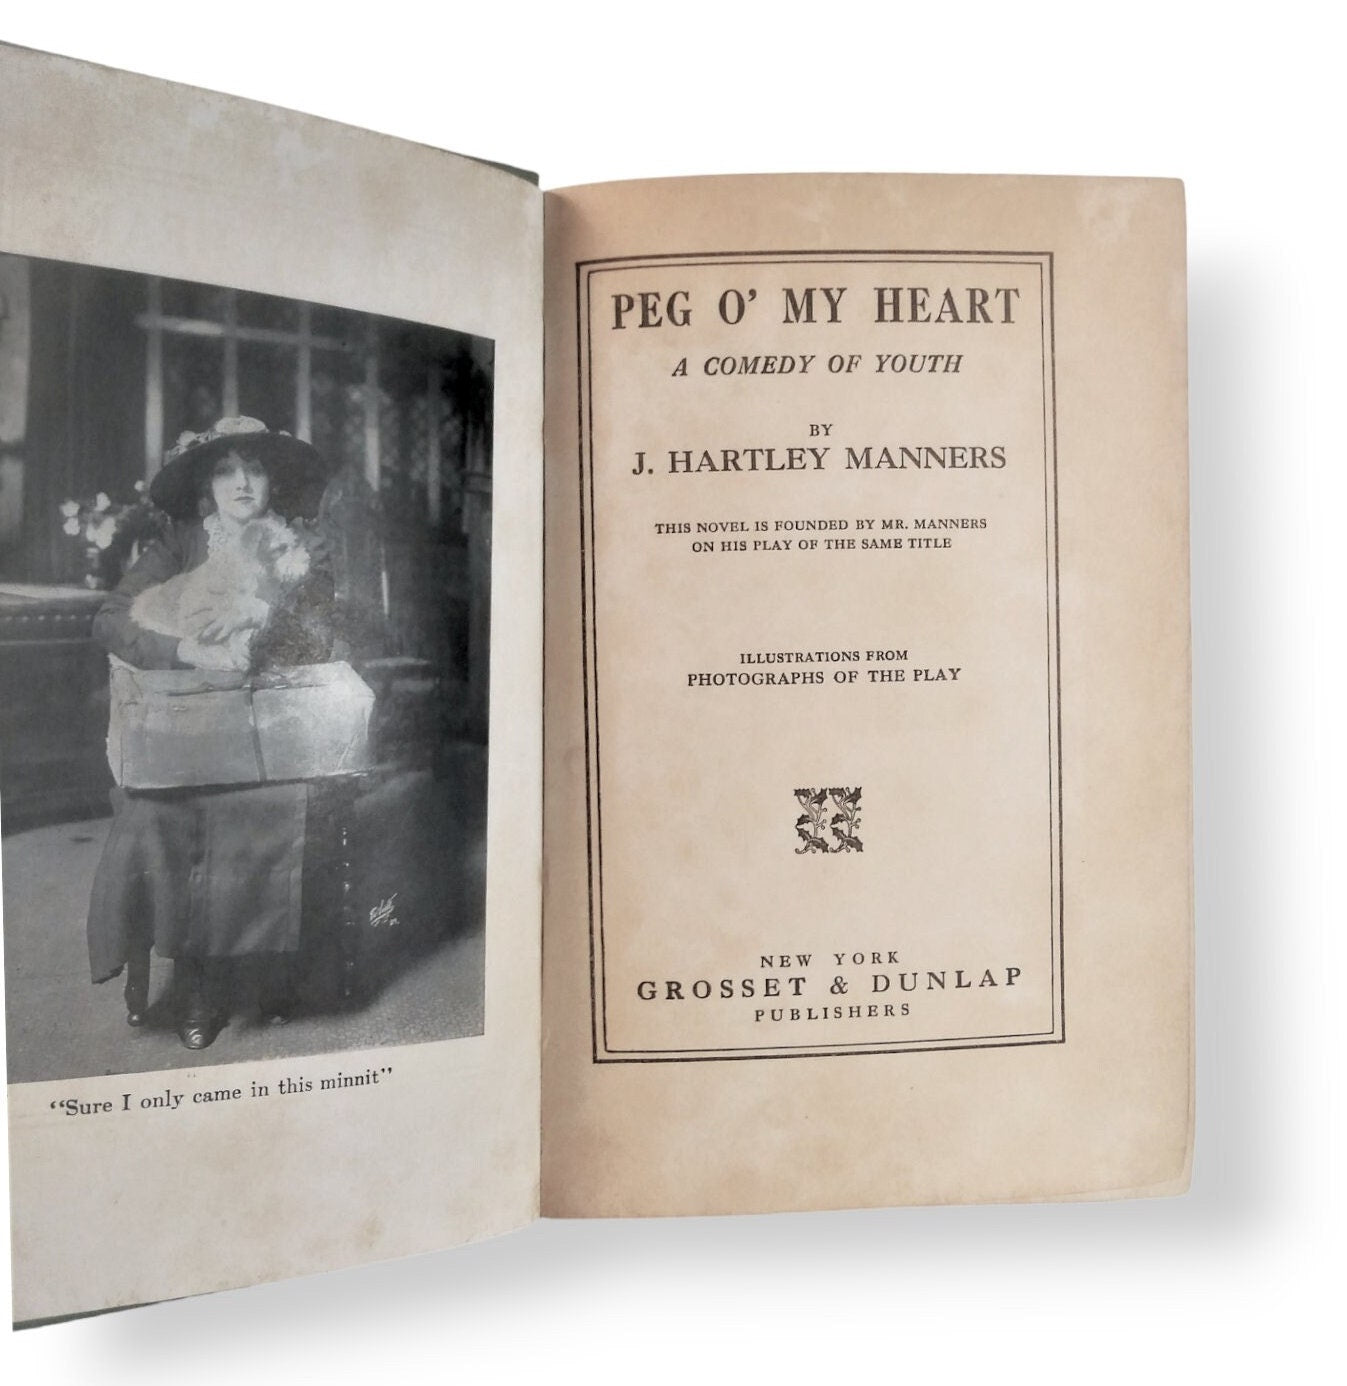 Peg O' My Heart by J. Hartley Manners 1913